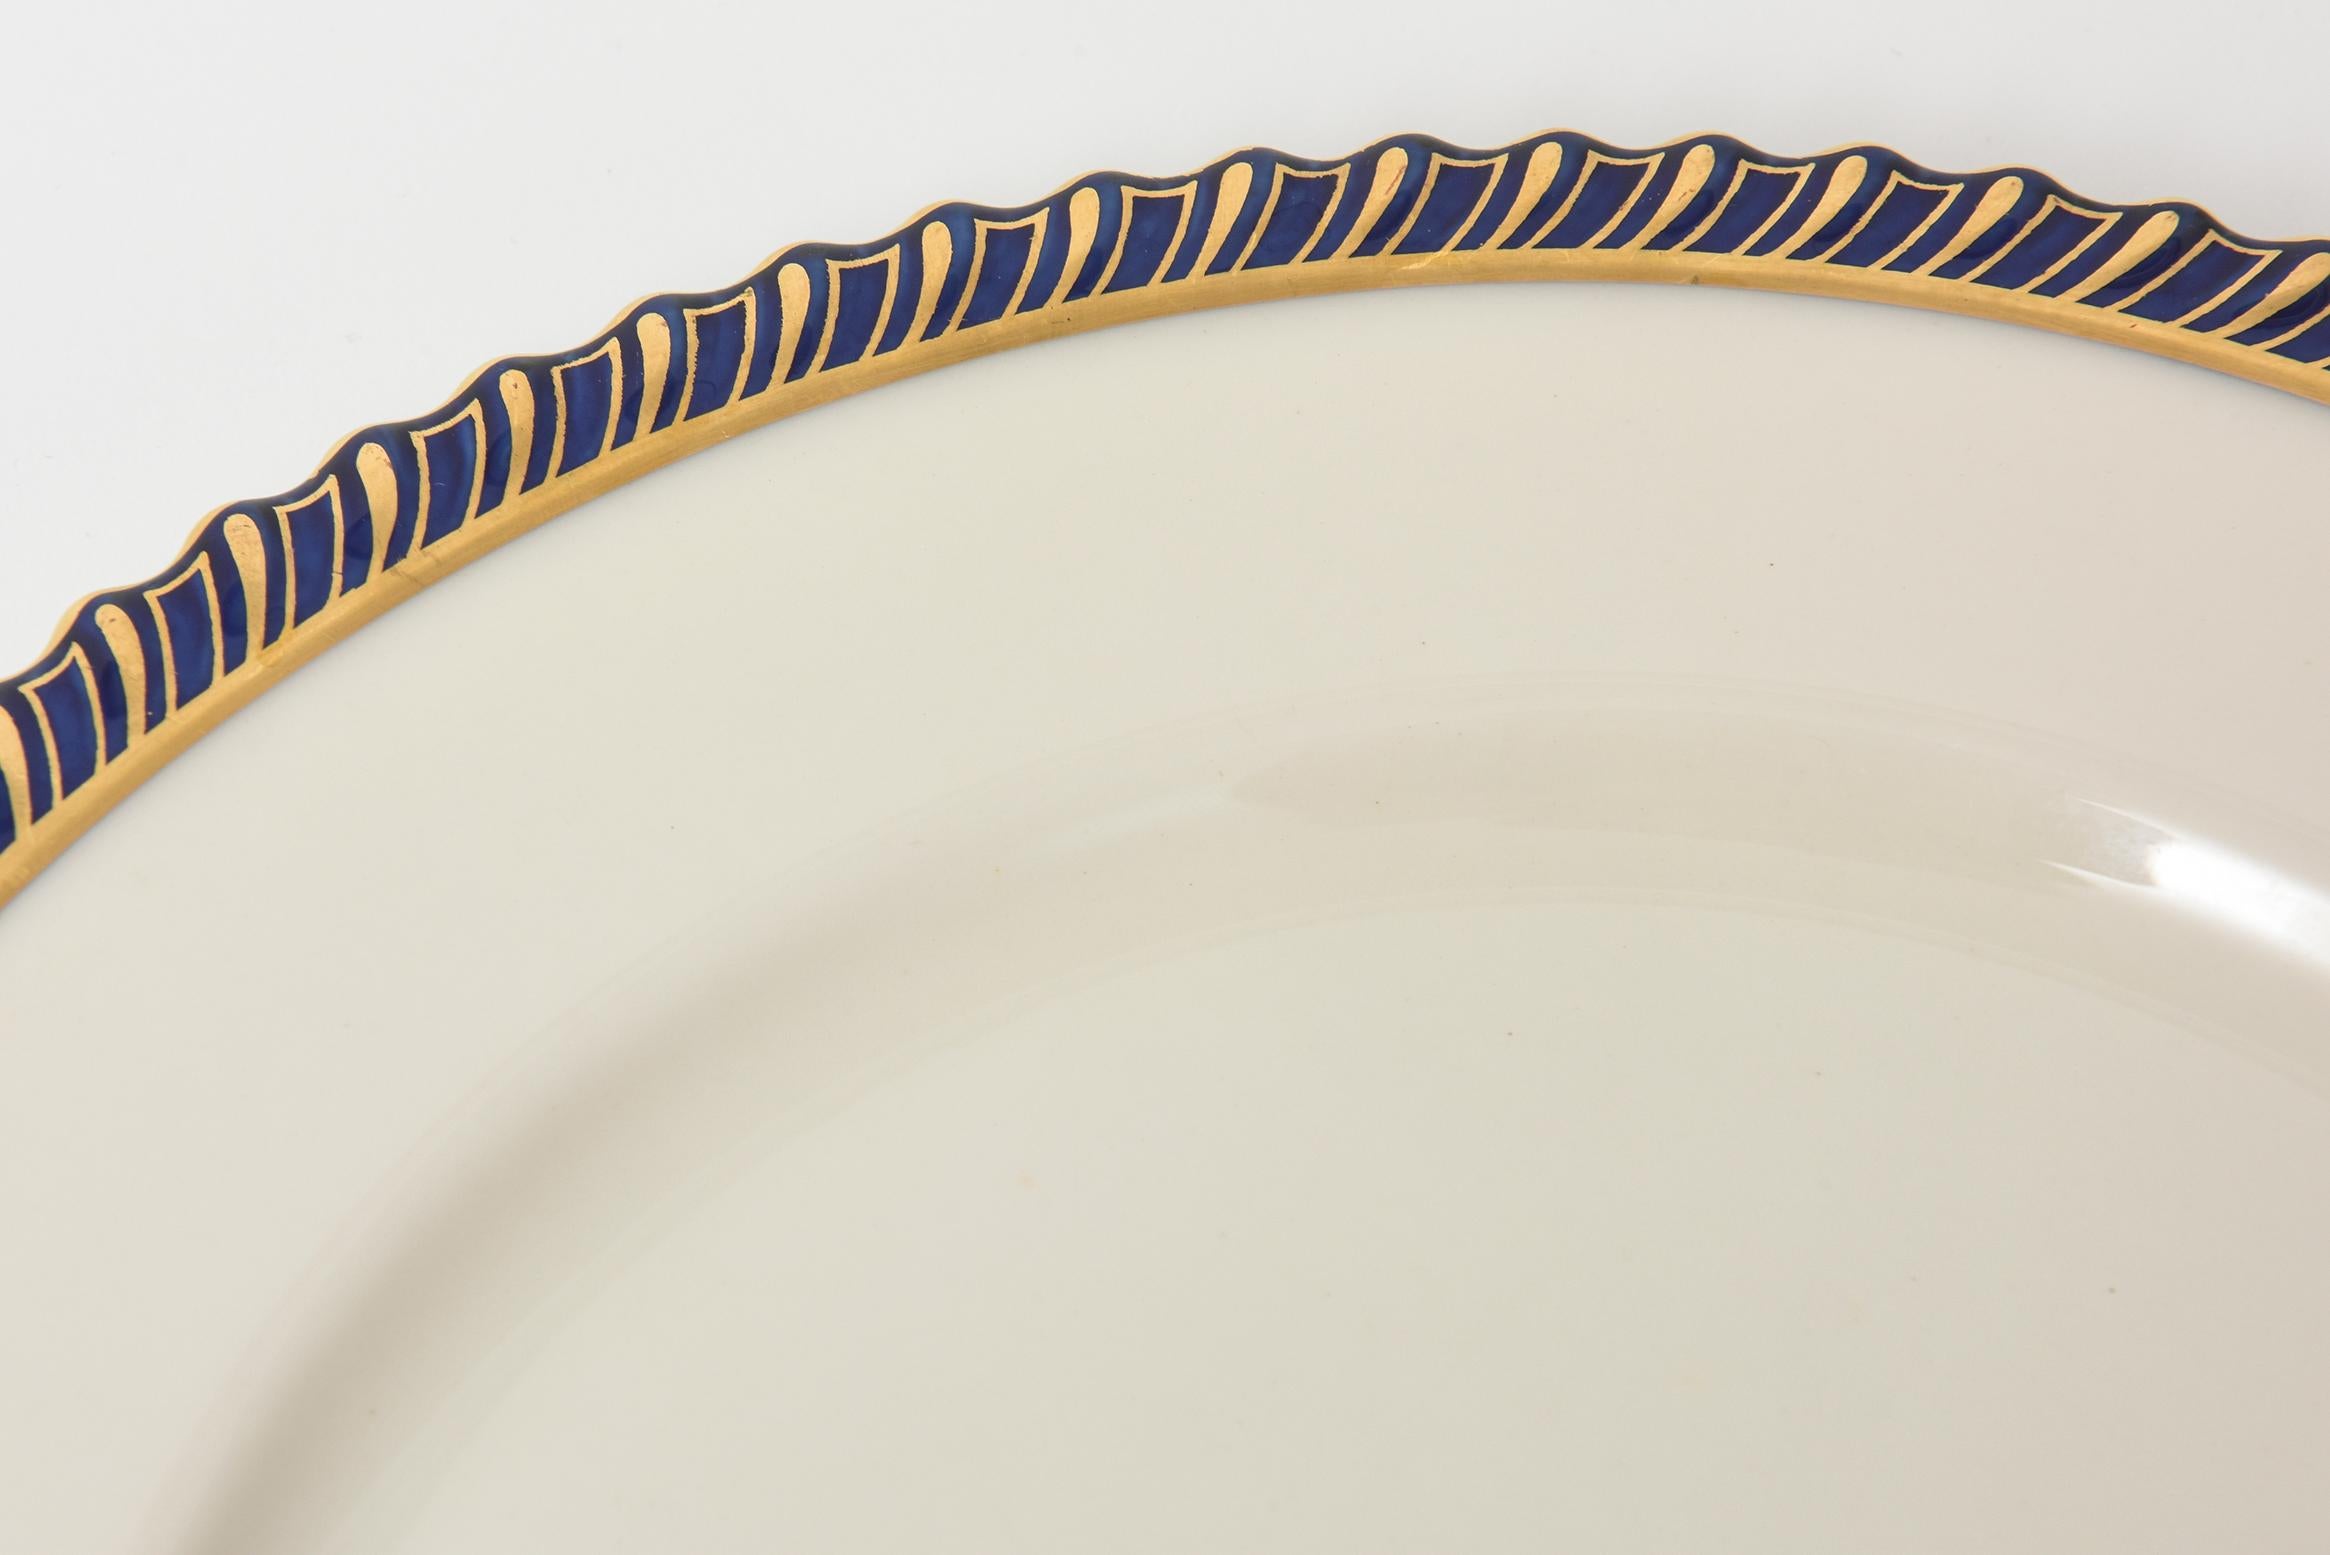 Tiffany & Co. Lenox Gadroon Cobalt Blue Gold Edge 10 Pc. Place Setting for 8 3